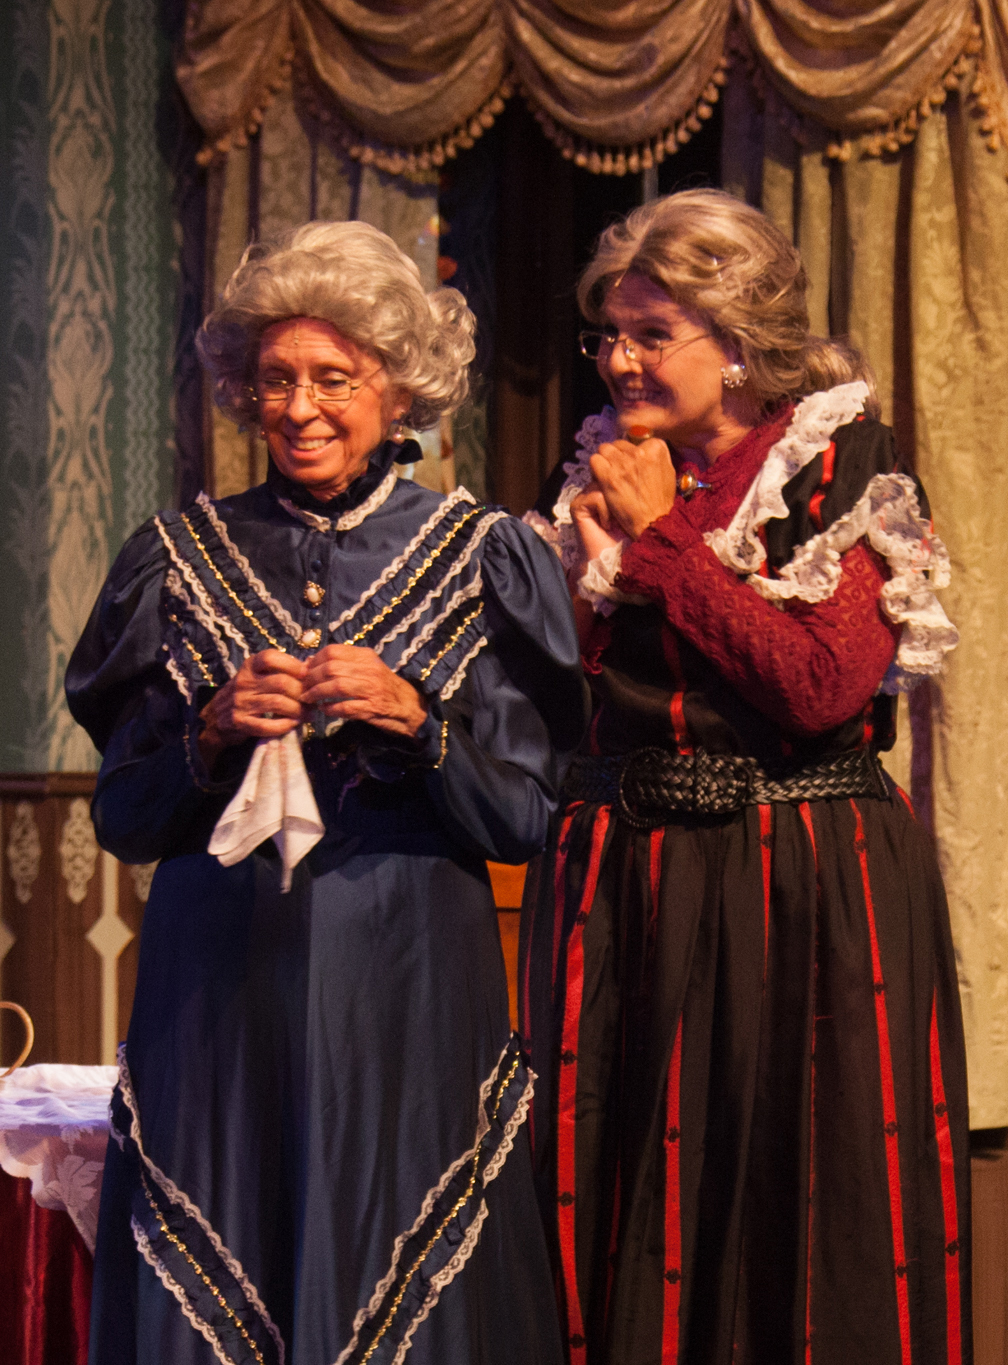 Arsenic and Old Lace Opens at Fair Theater This Weekend - Hatchie Press